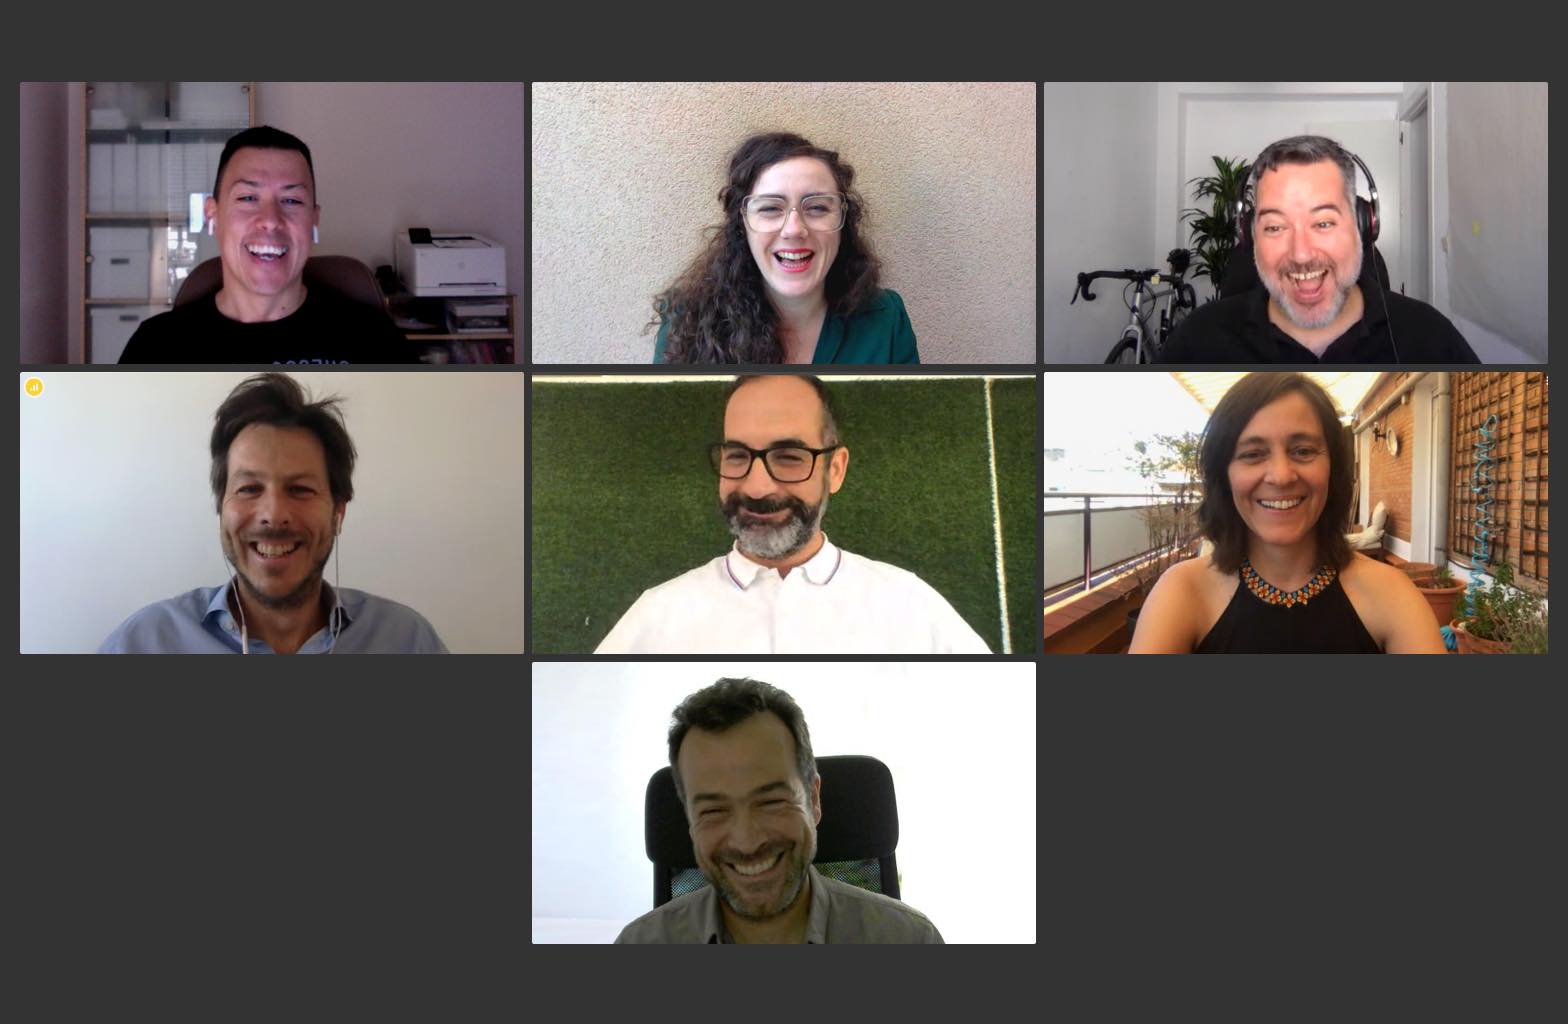 Videoconference with all members of the ilios team, all laughing.